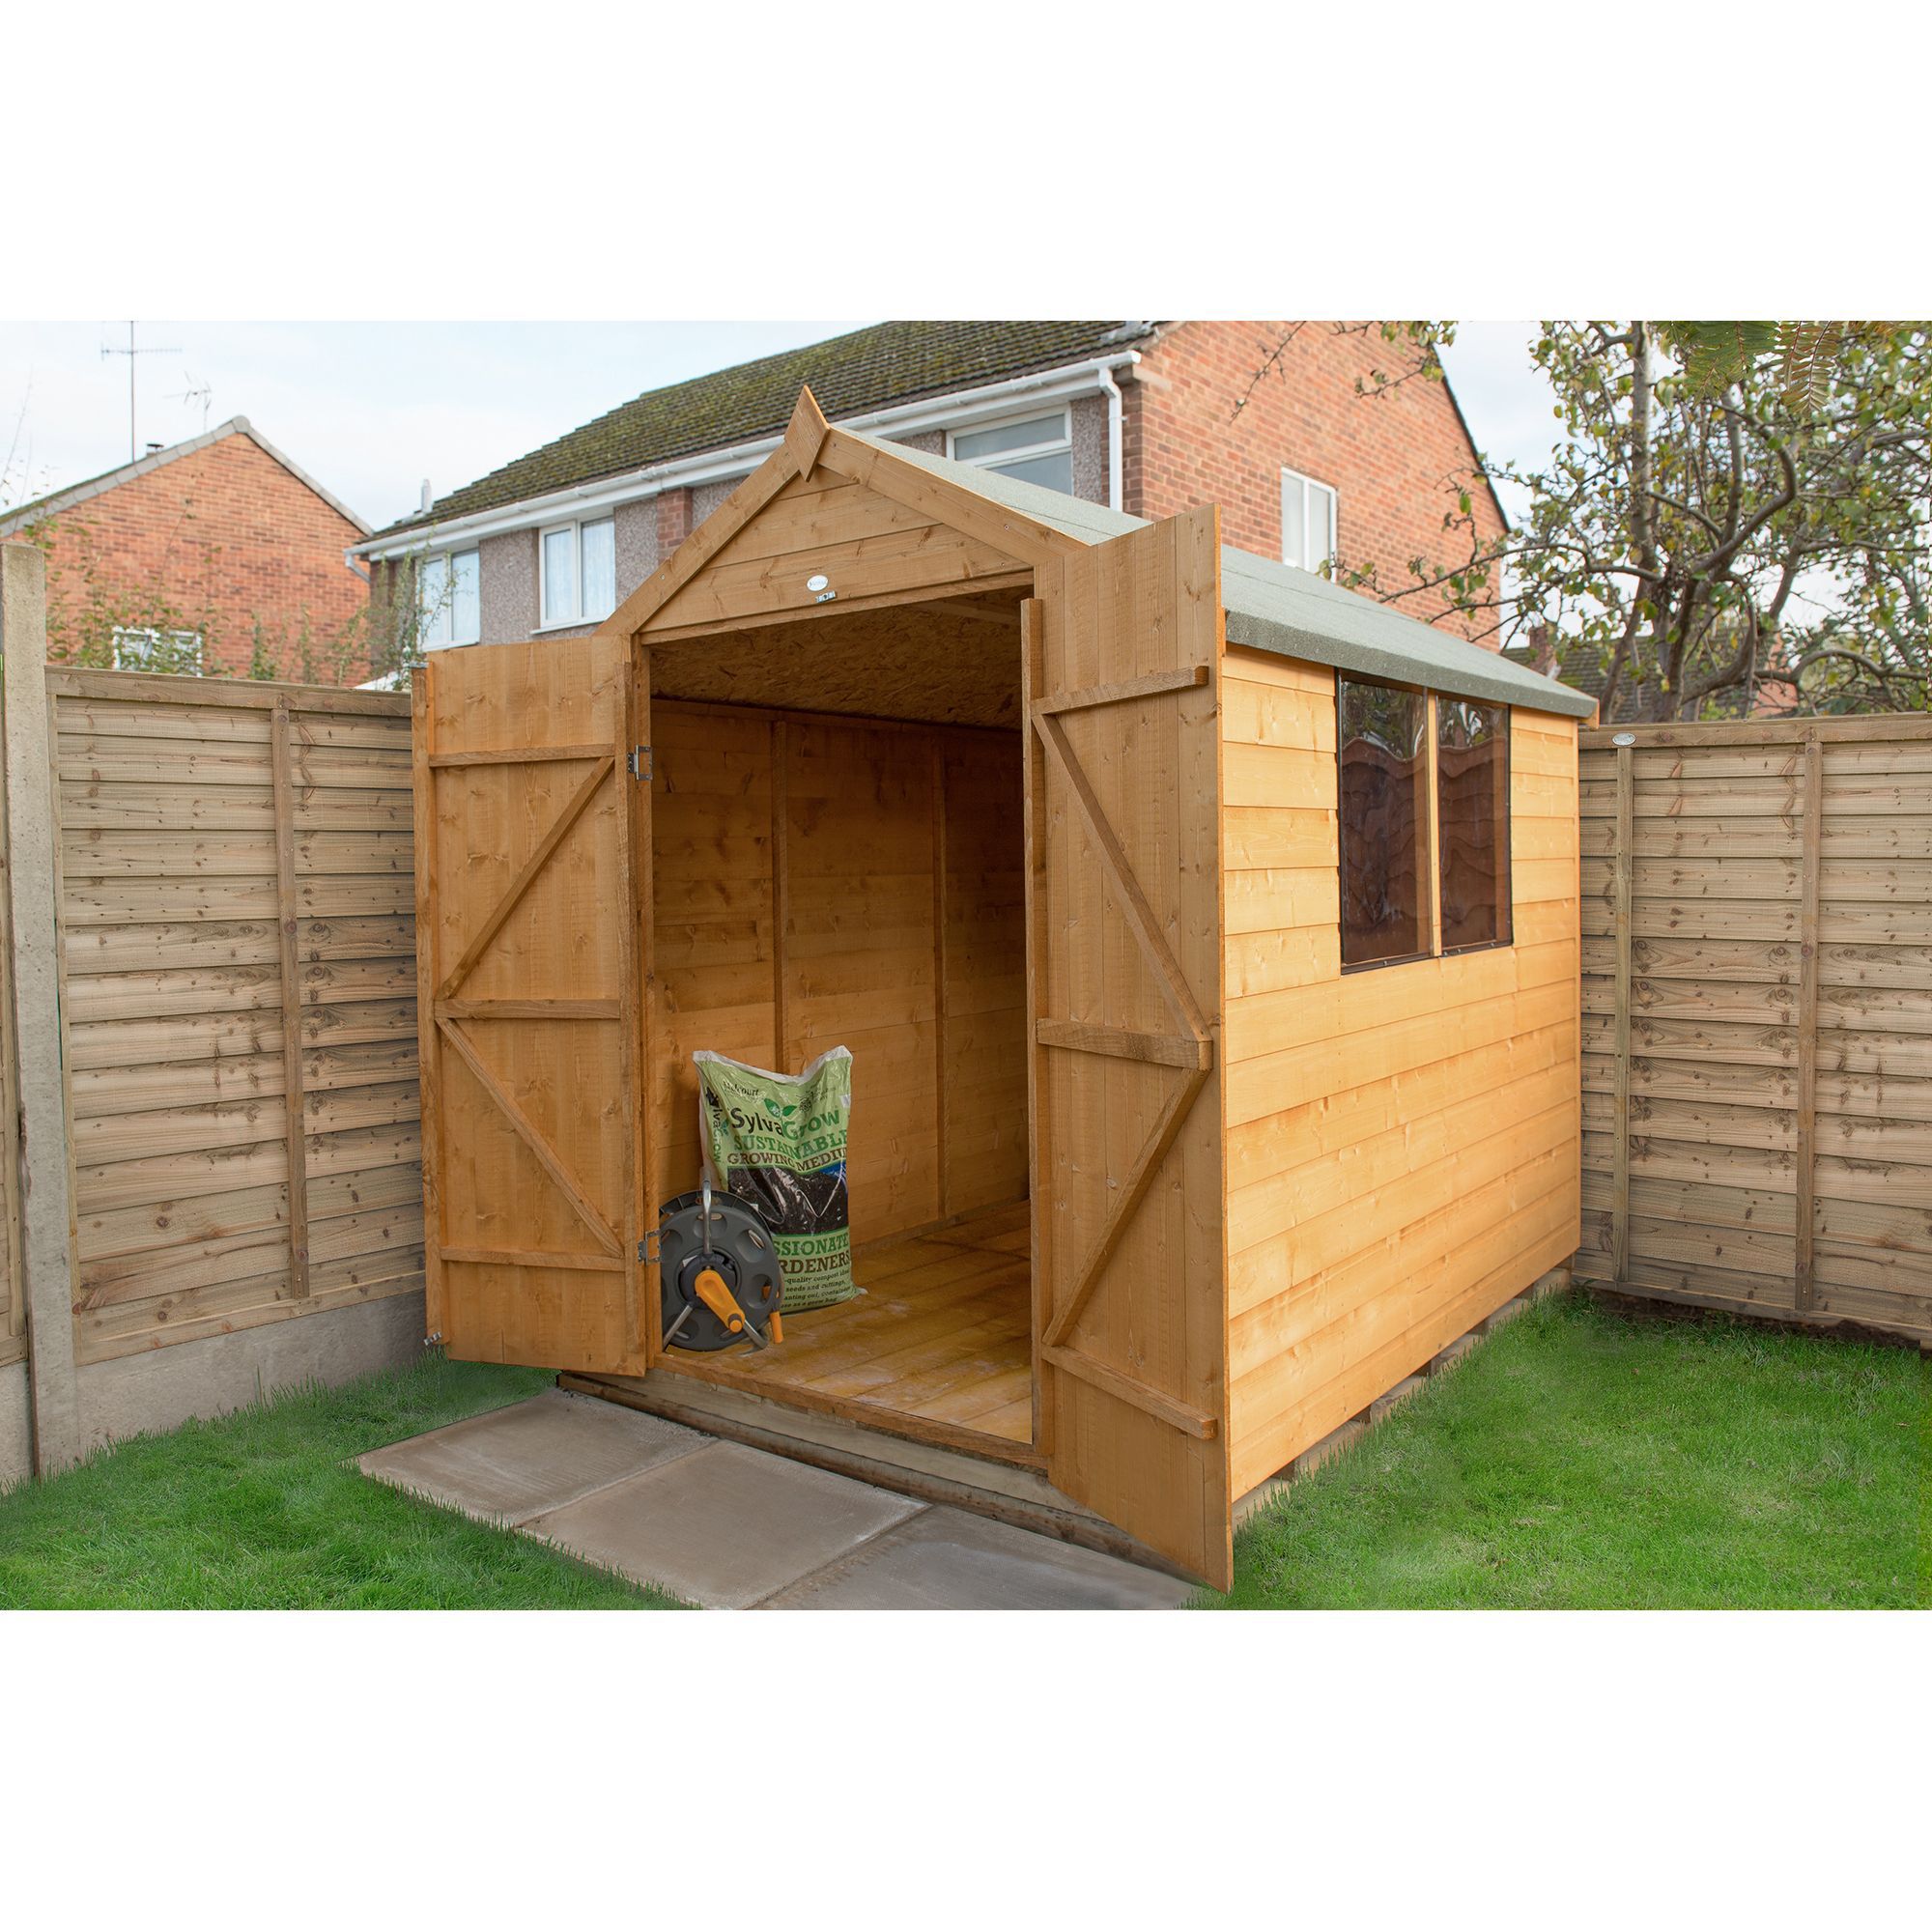 8x6 Apex roof Shiplap Wooden Double Door Shed Base 